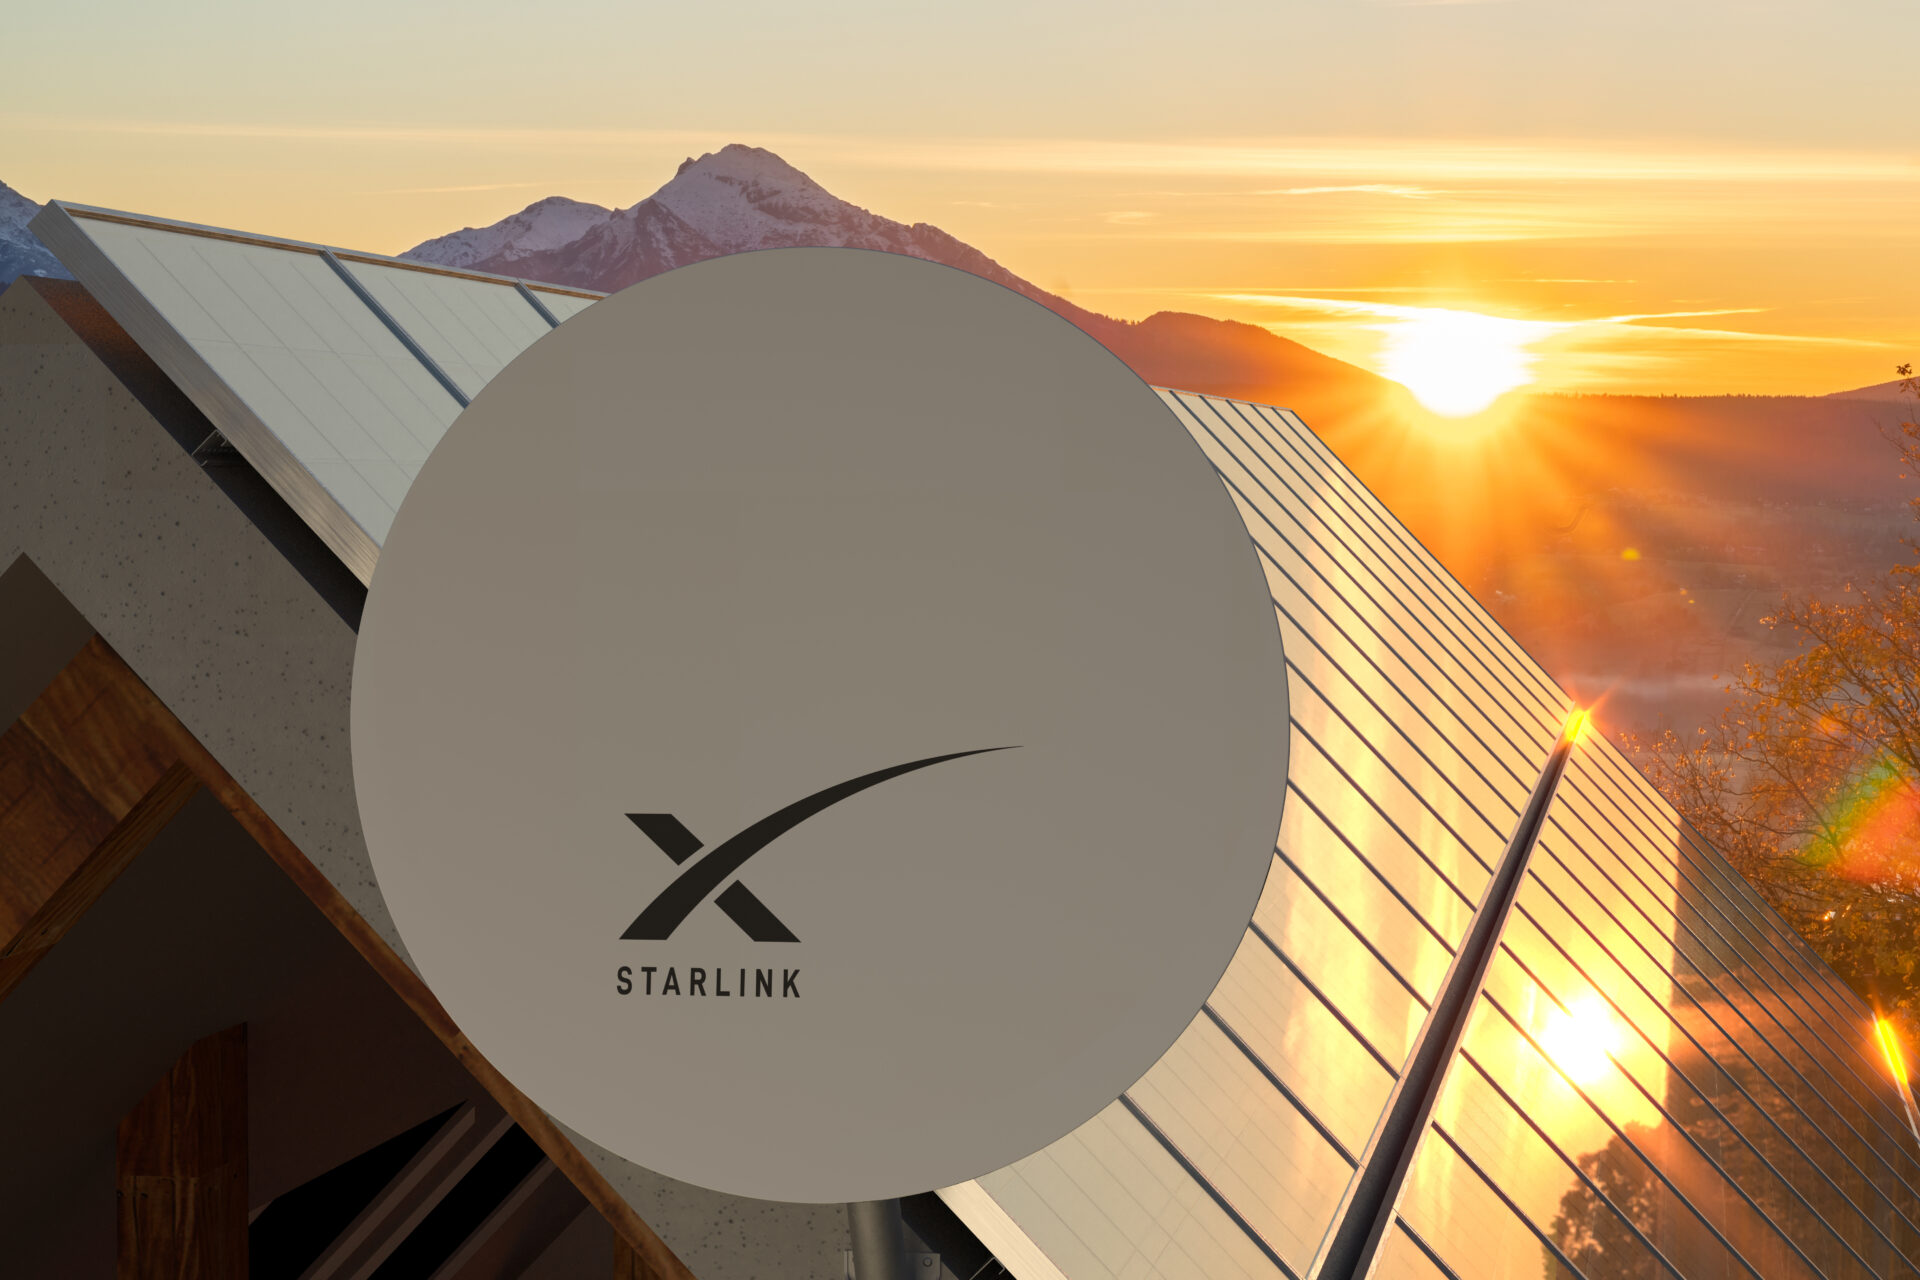 A small satellite dish with a stylized X and the word Starlink